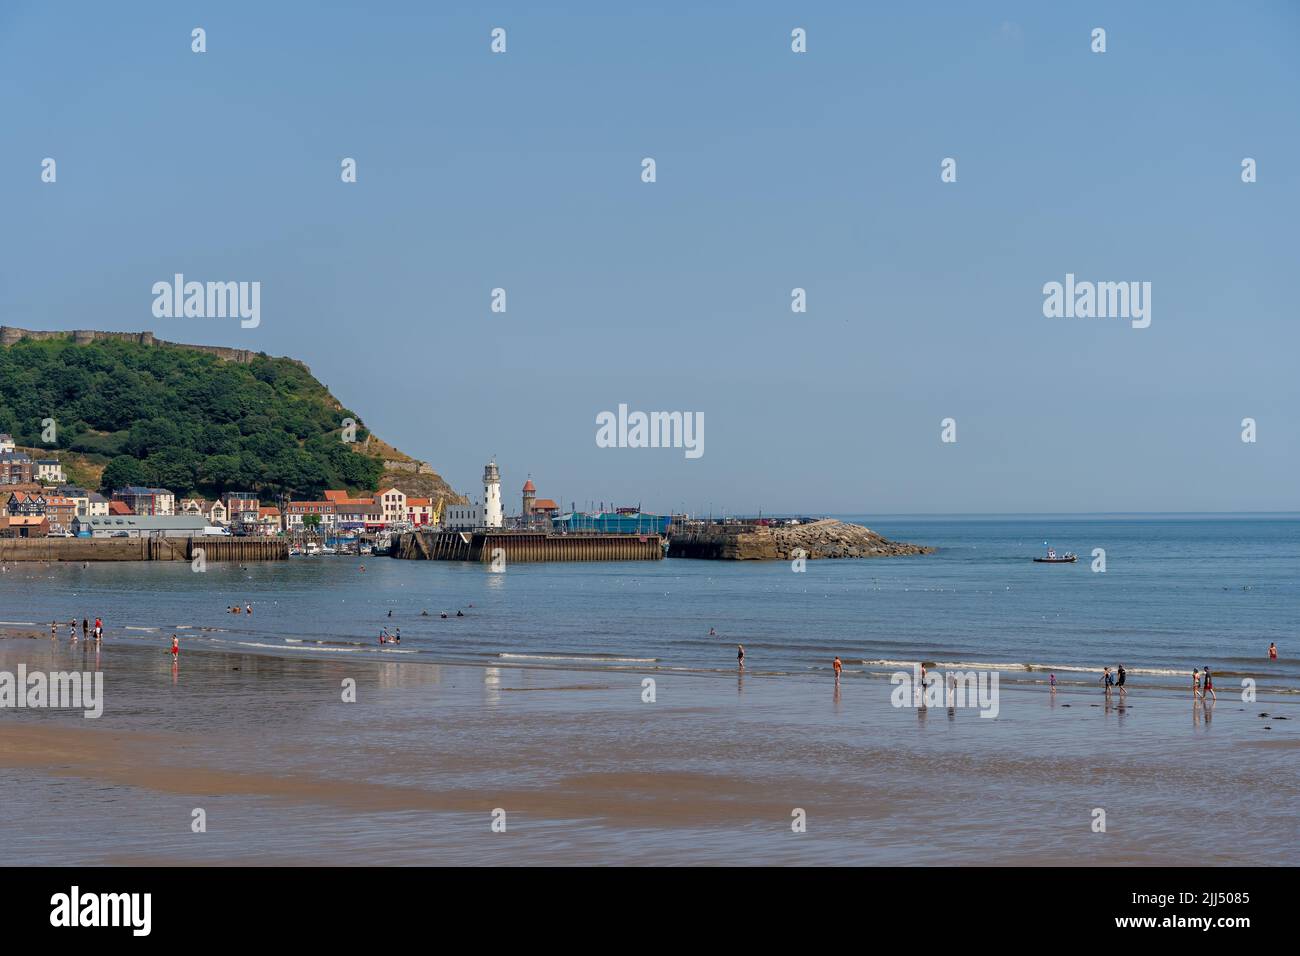 SCARBOROUGH,  NORTH YORKSHIRE, UK - JULY 18: View of the sea front in Scarborough, North Yorkshire on July 18, 2022. Unidentified people Stock Photo